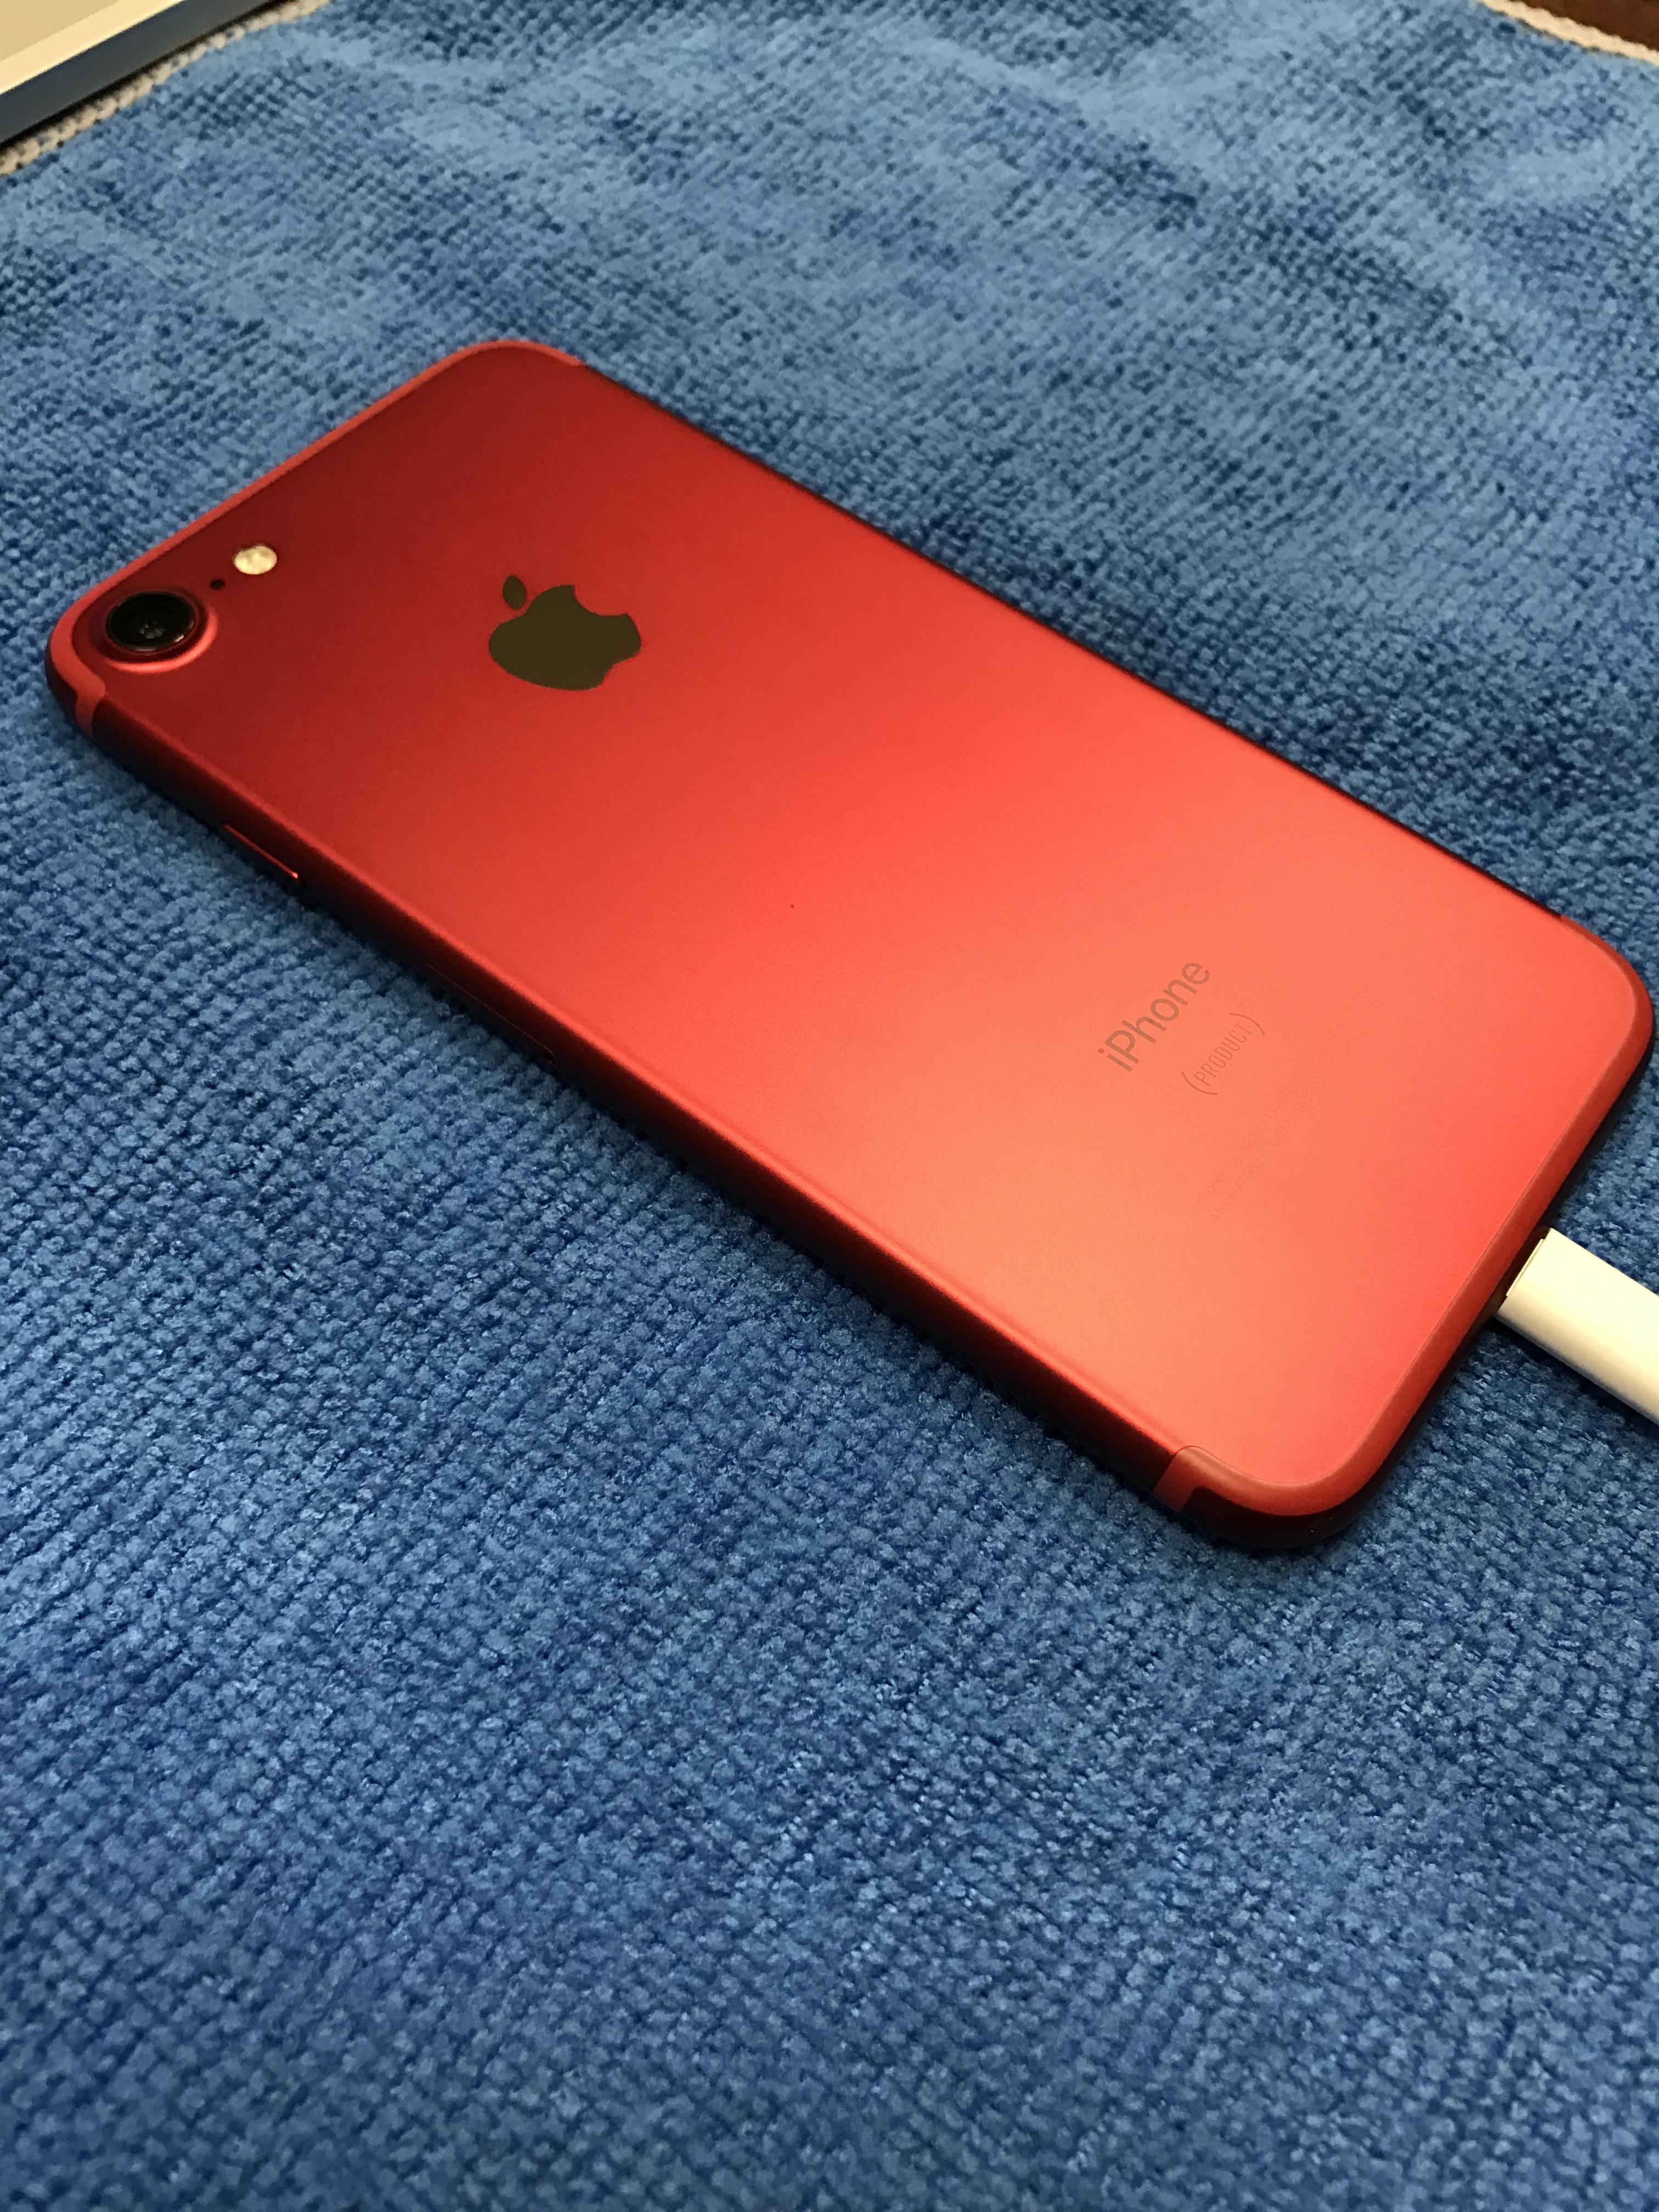 iPhone 7 and 7 Plus (PRODUCT) RED Pics | MacRumors Forums